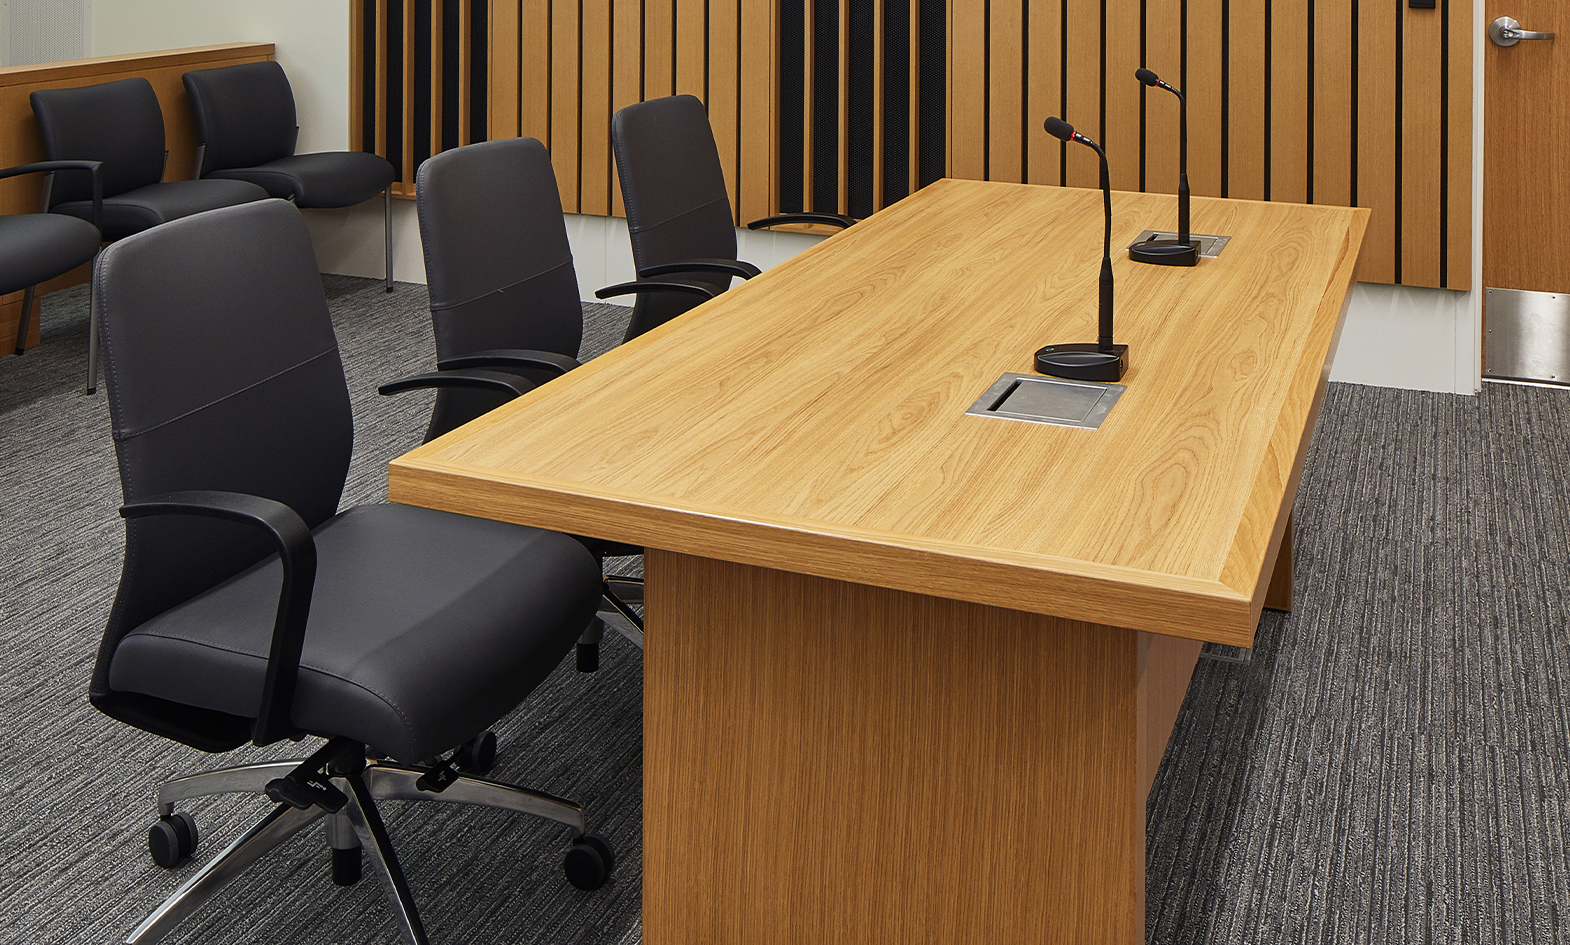 installation-image-multnomah-courtroom-tables-1570x945